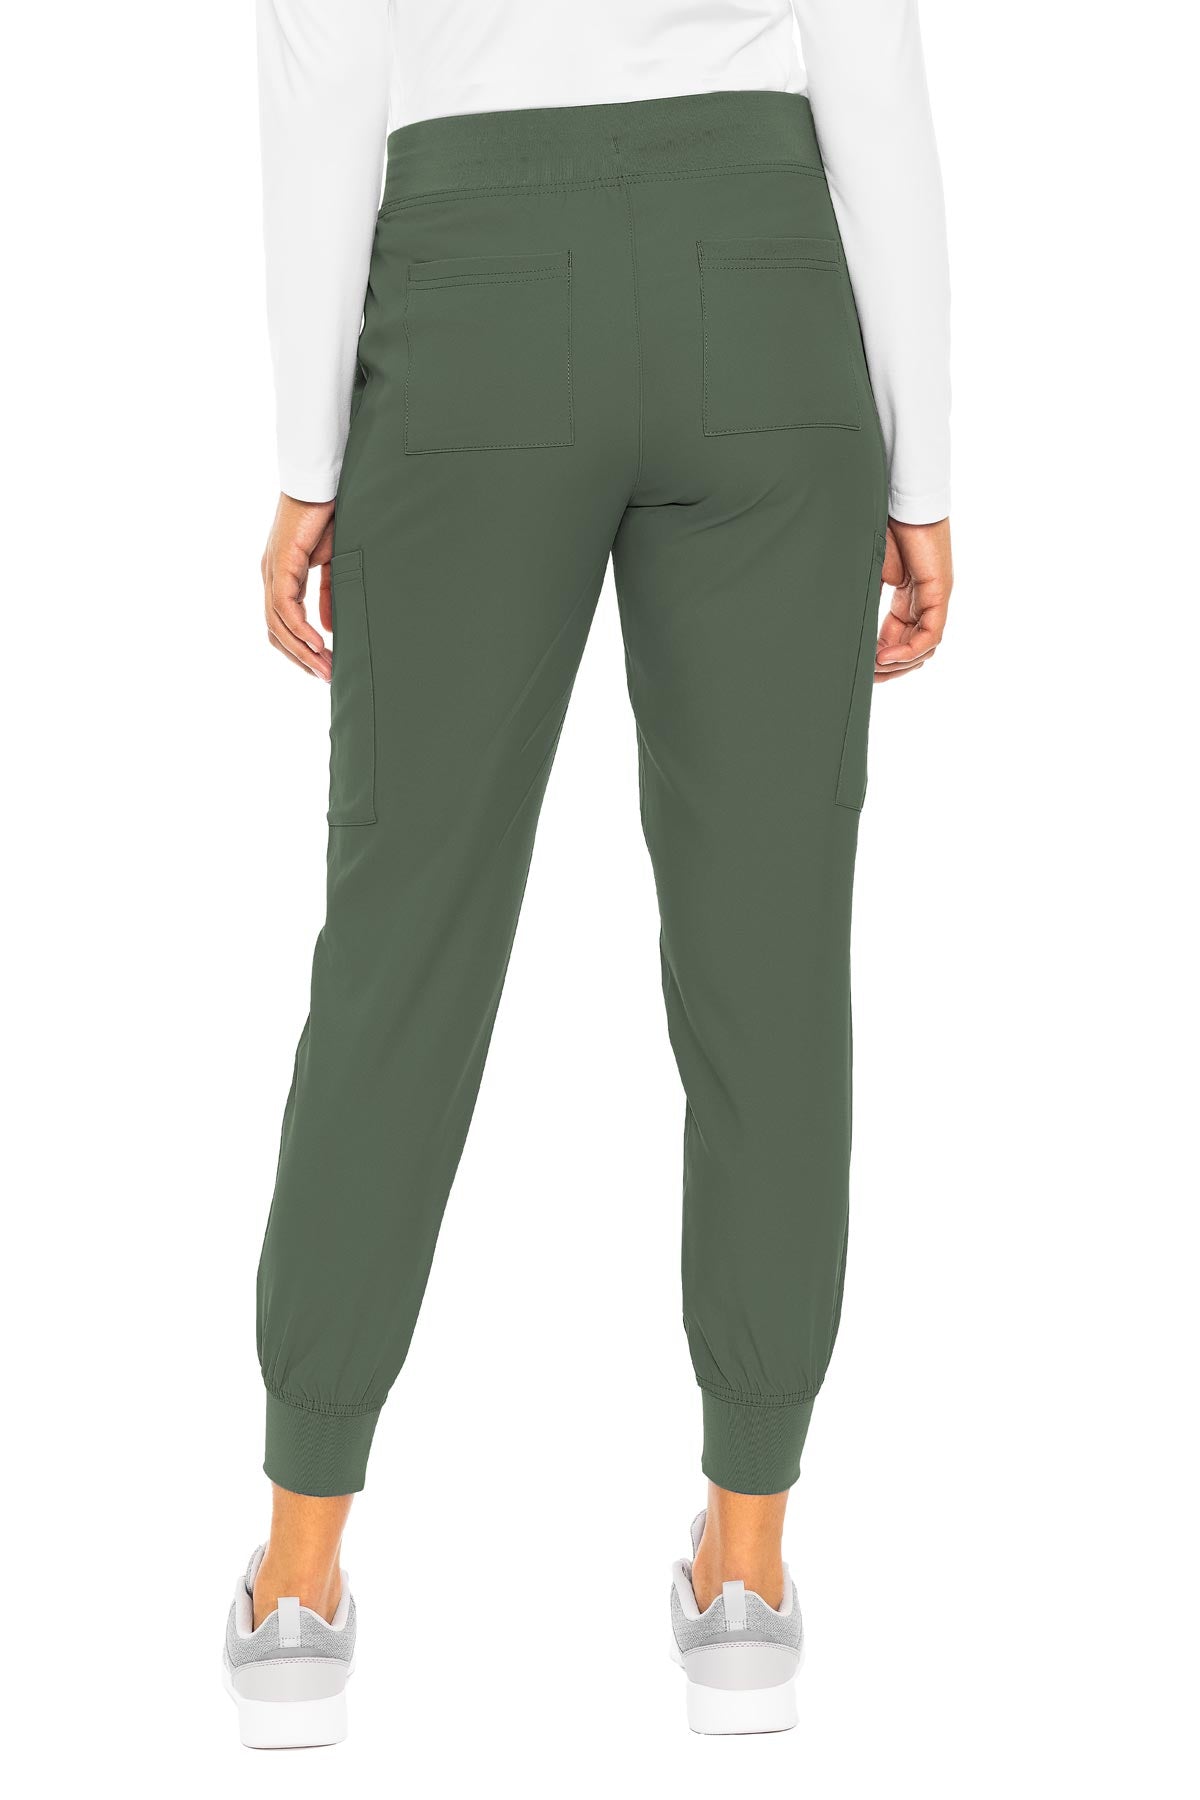 Med Couture Peaches Seamed Jogger Tall Length (XS-XL) – Berani